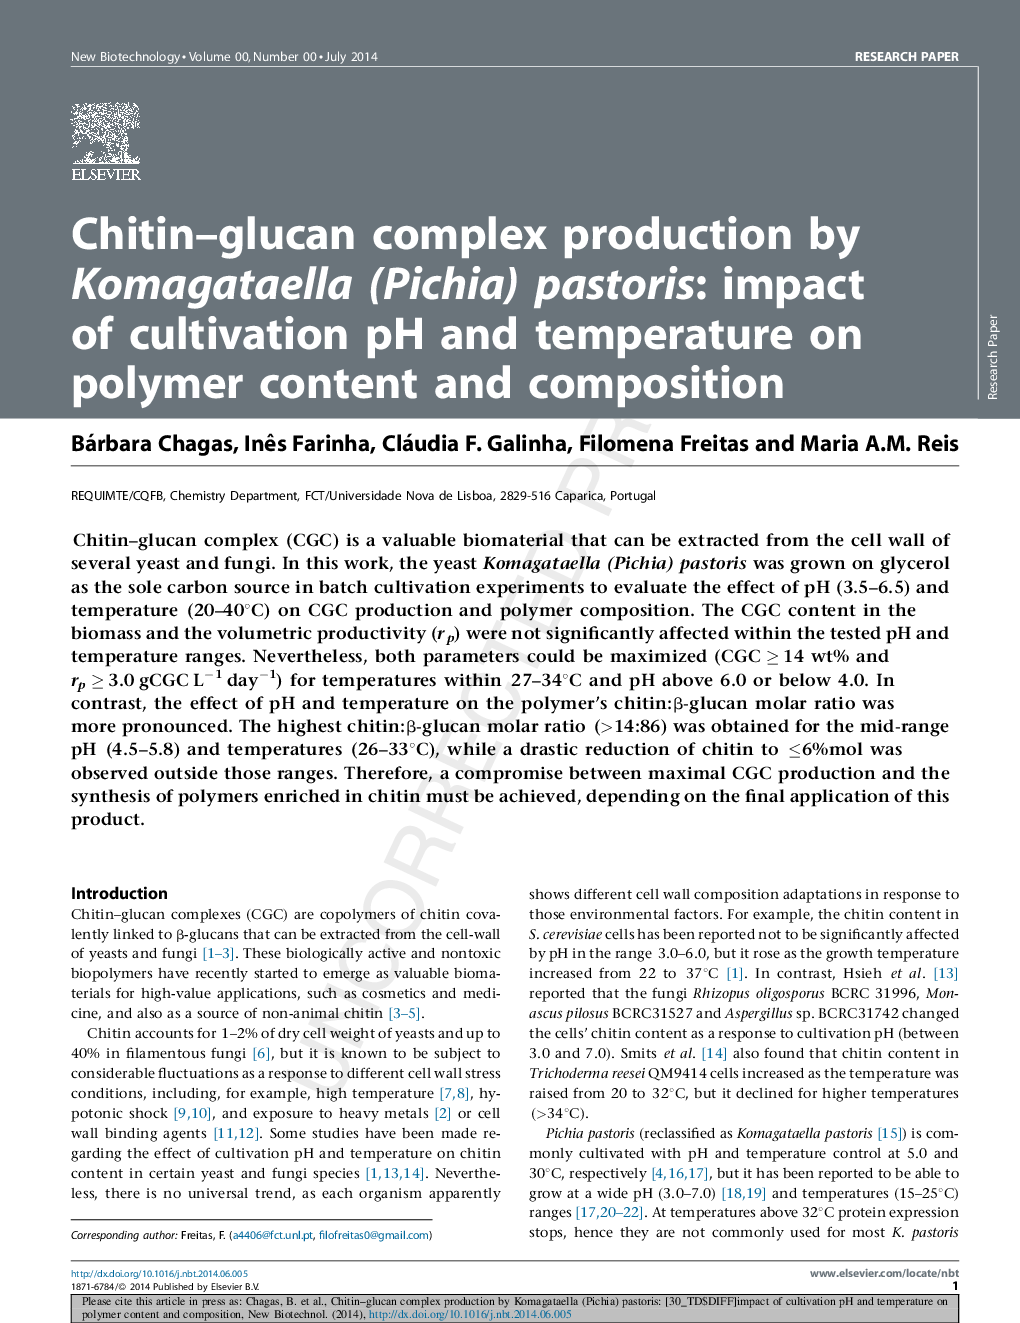 Chitin-glucan complex production by Komagataella (Pichia) pastoris: impact of cultivation pH and temperature on polymer content and composition